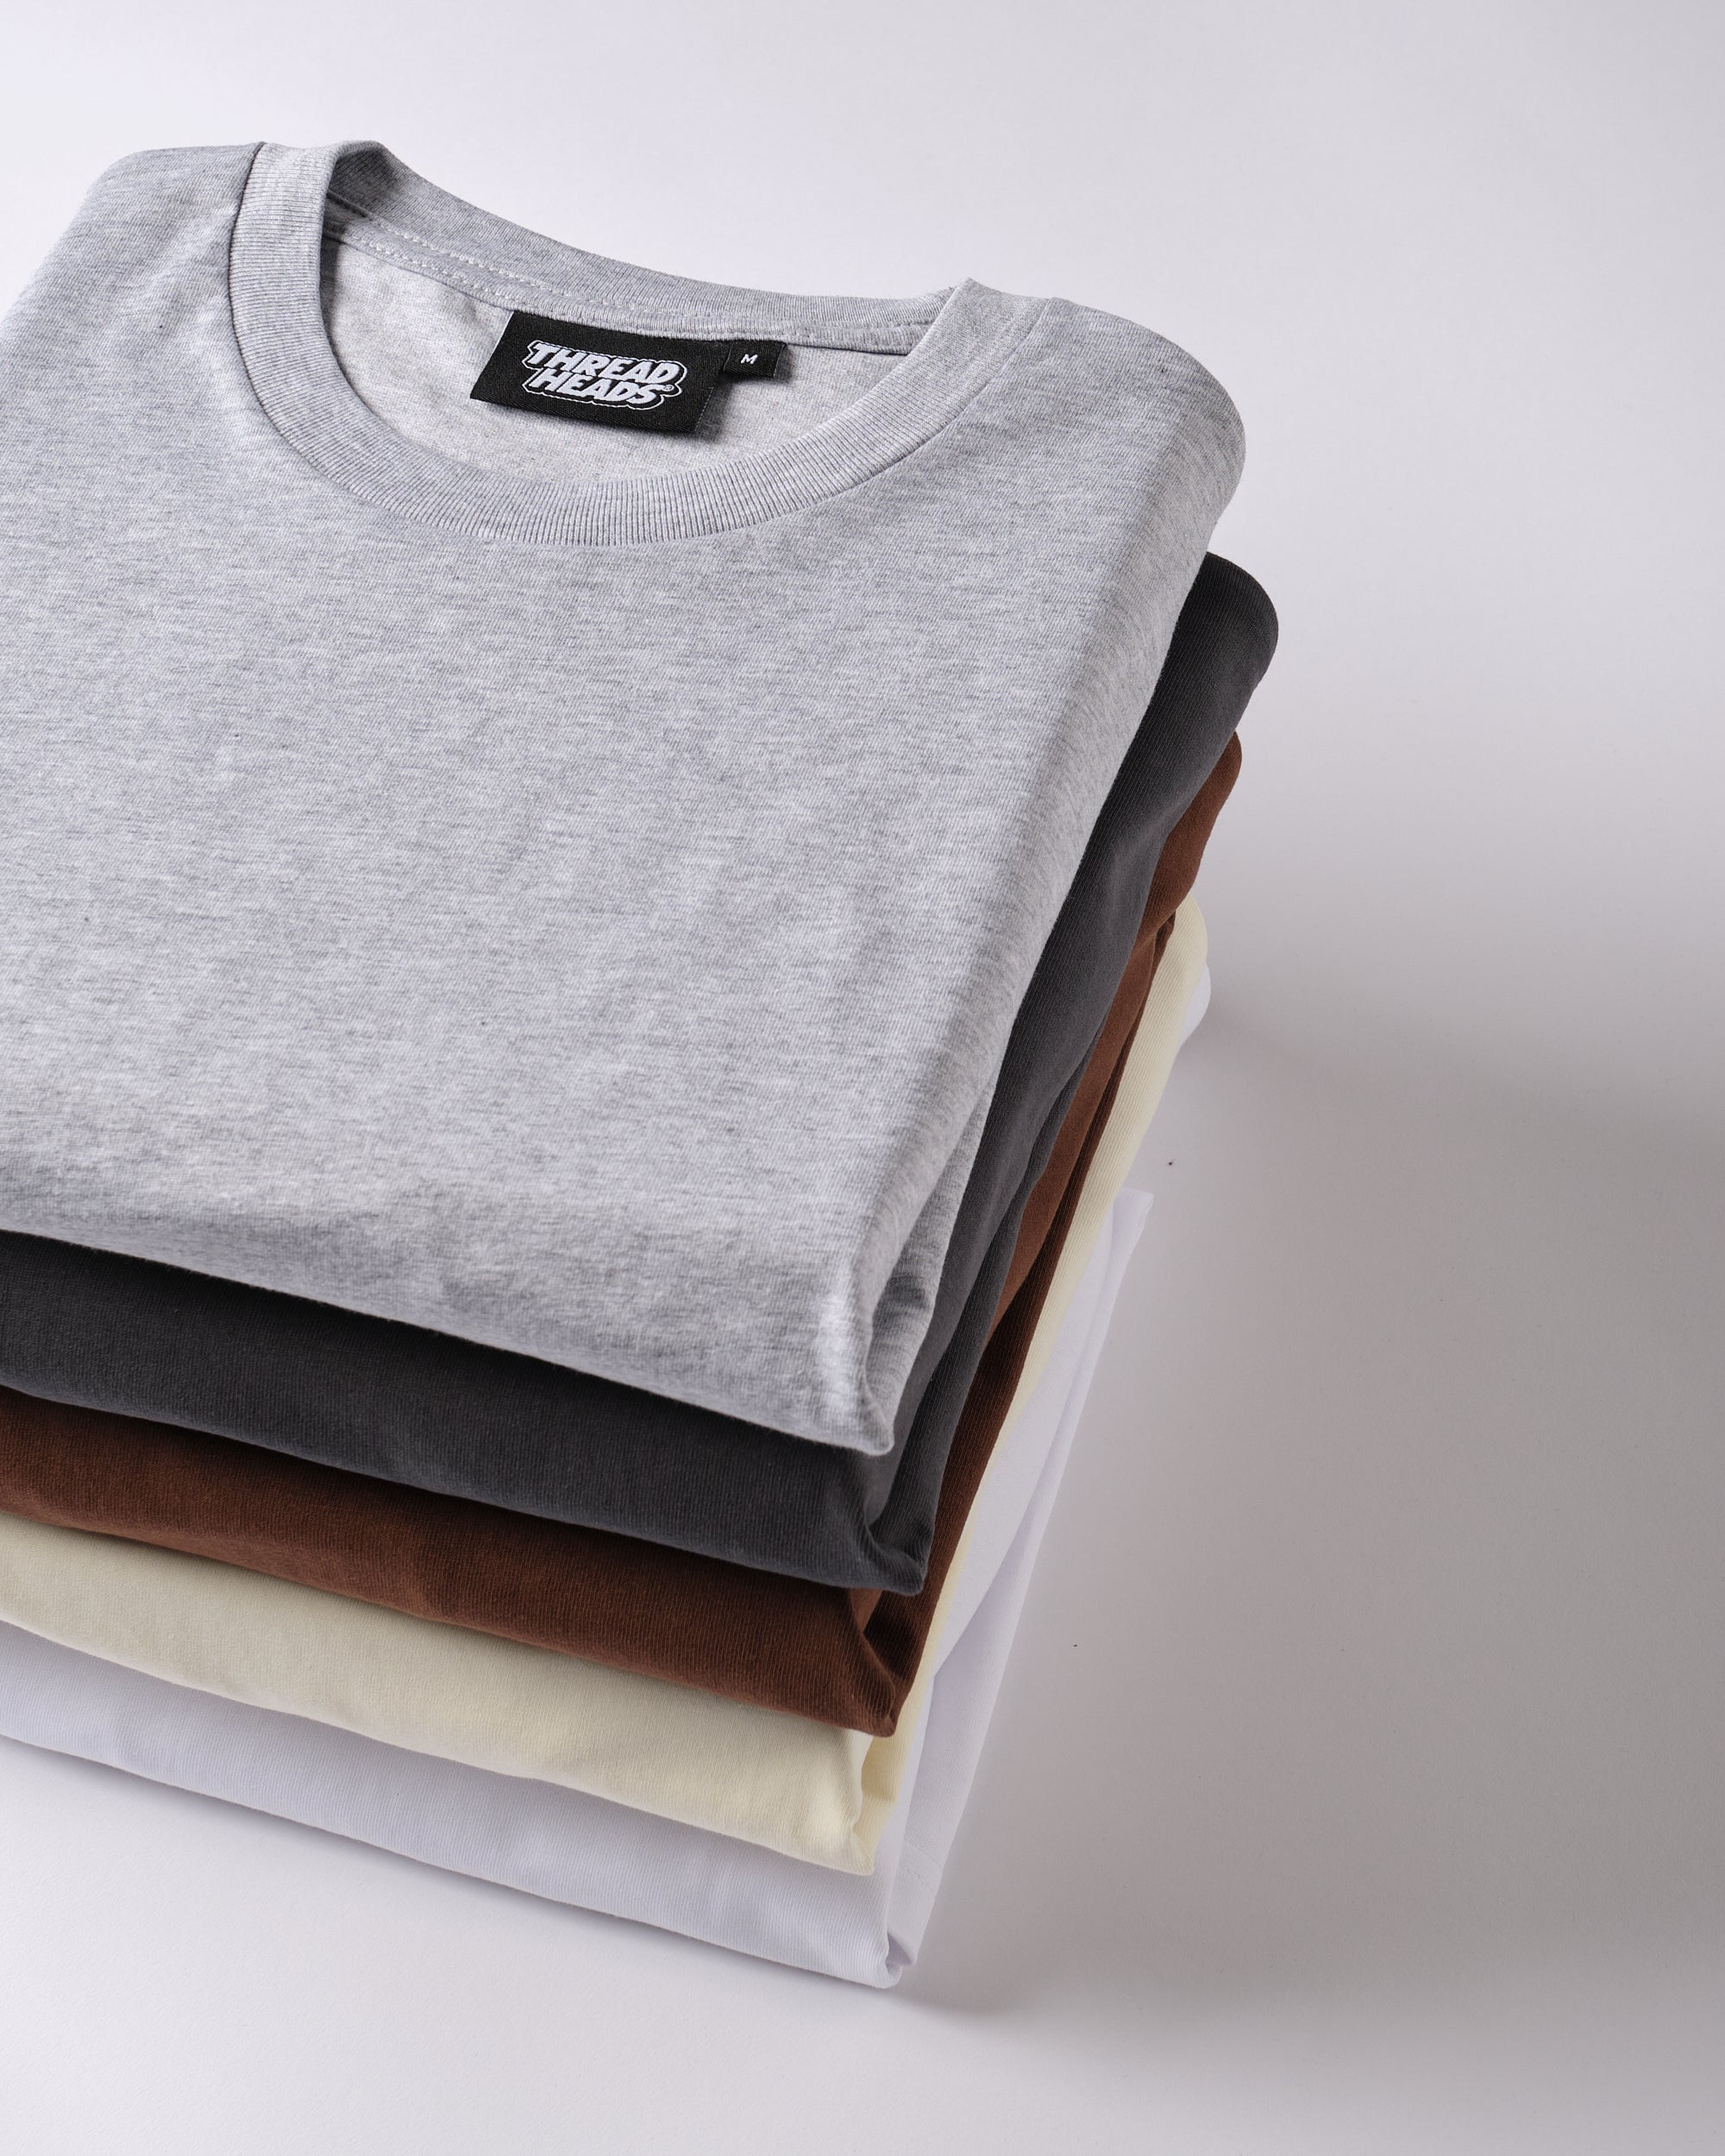 Classic Tee 5-Pack: Grey, Charcoal, Brown, Natural, White